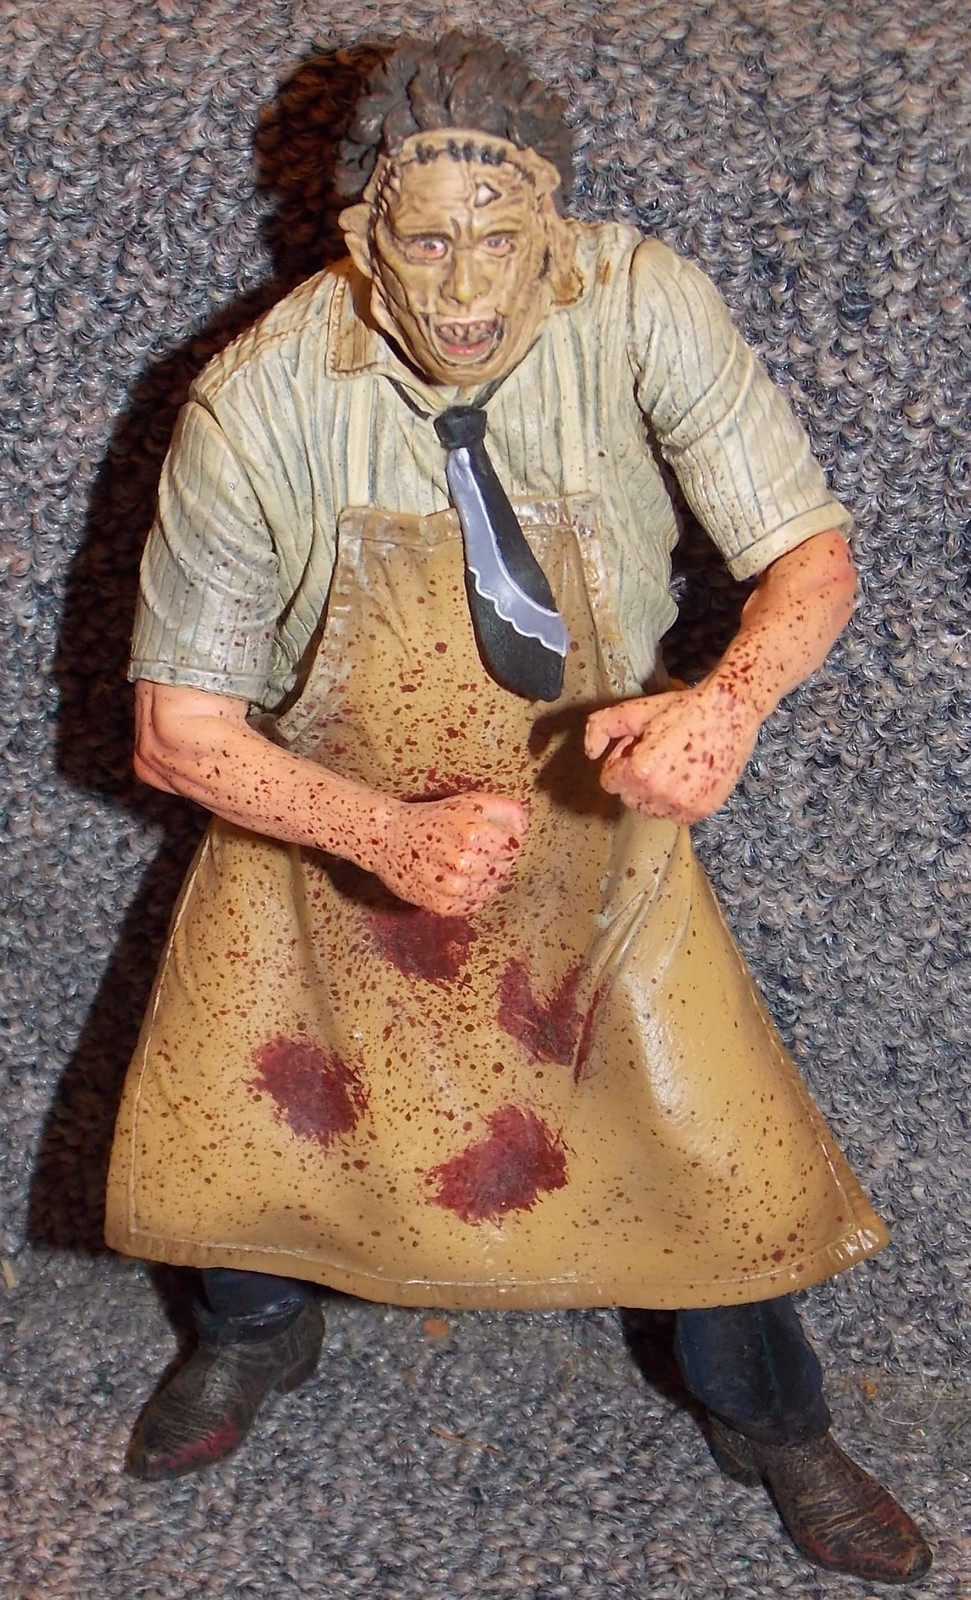 Primary image for 2006 NECA Texas Chainsaw Massacre Leatherface 7 inch Figure